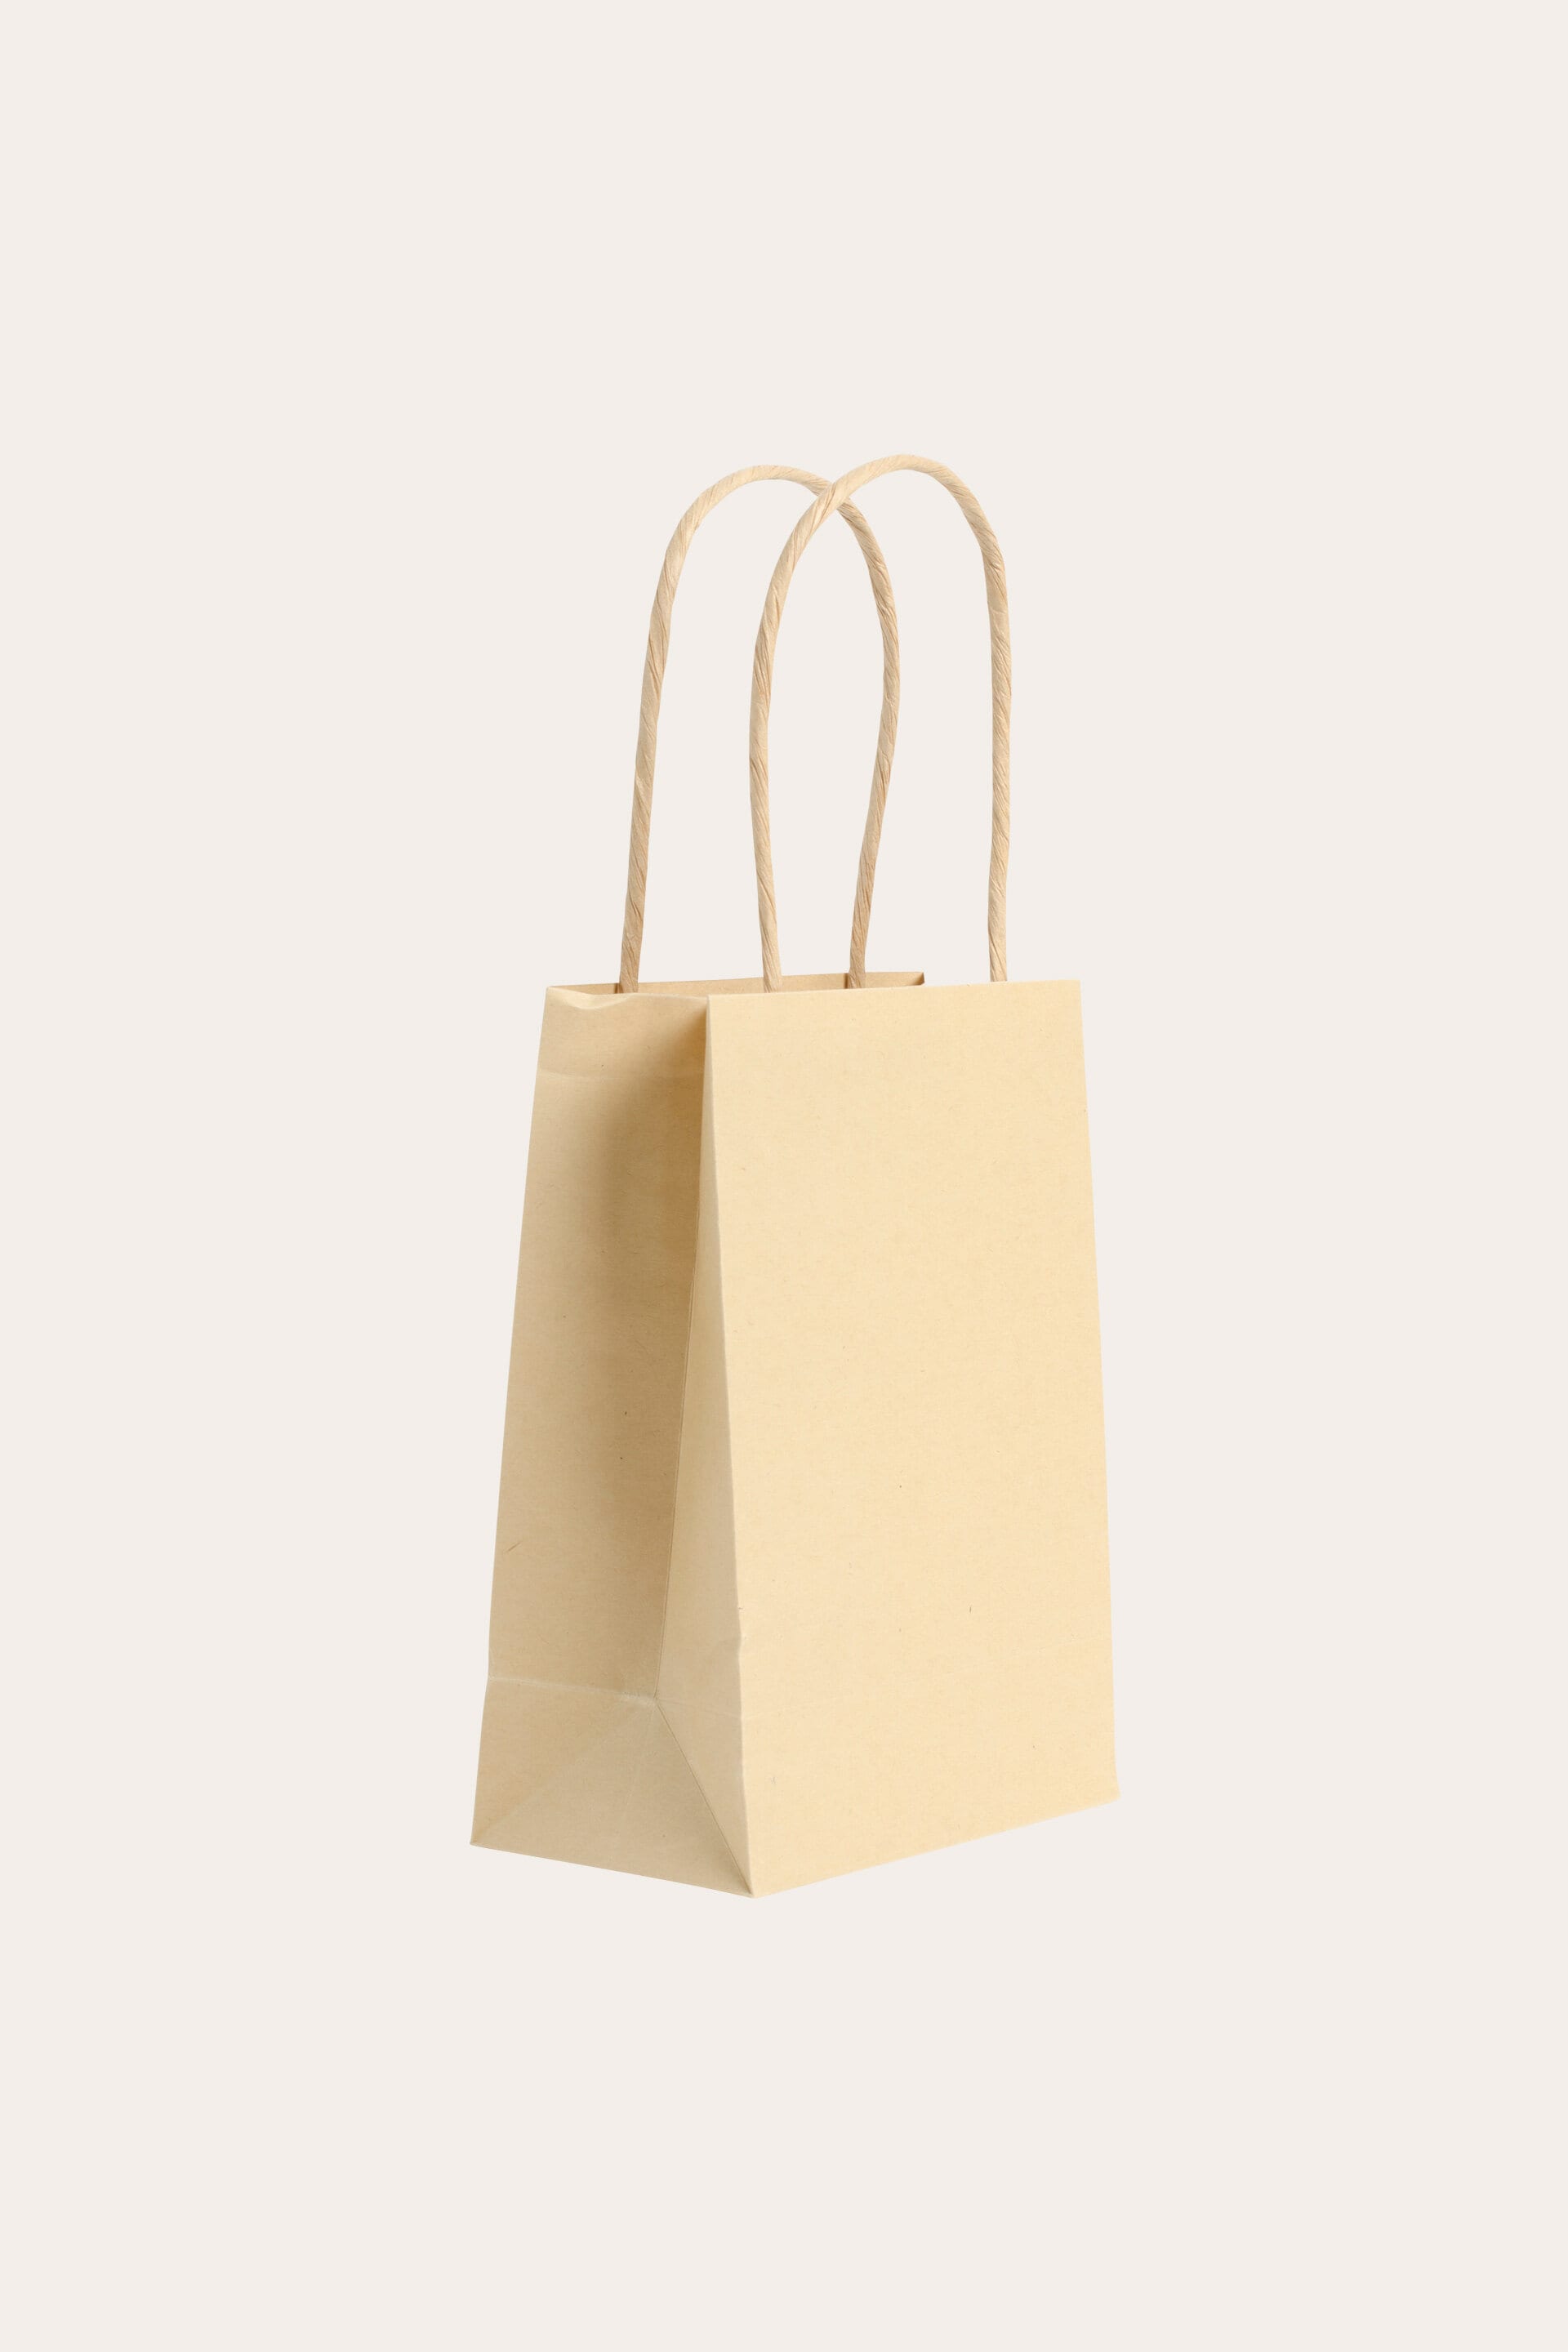 Natural Brown Paper Gift Bag with Cord Handles. Approx Size 27.5cm x 35cm x  10cm